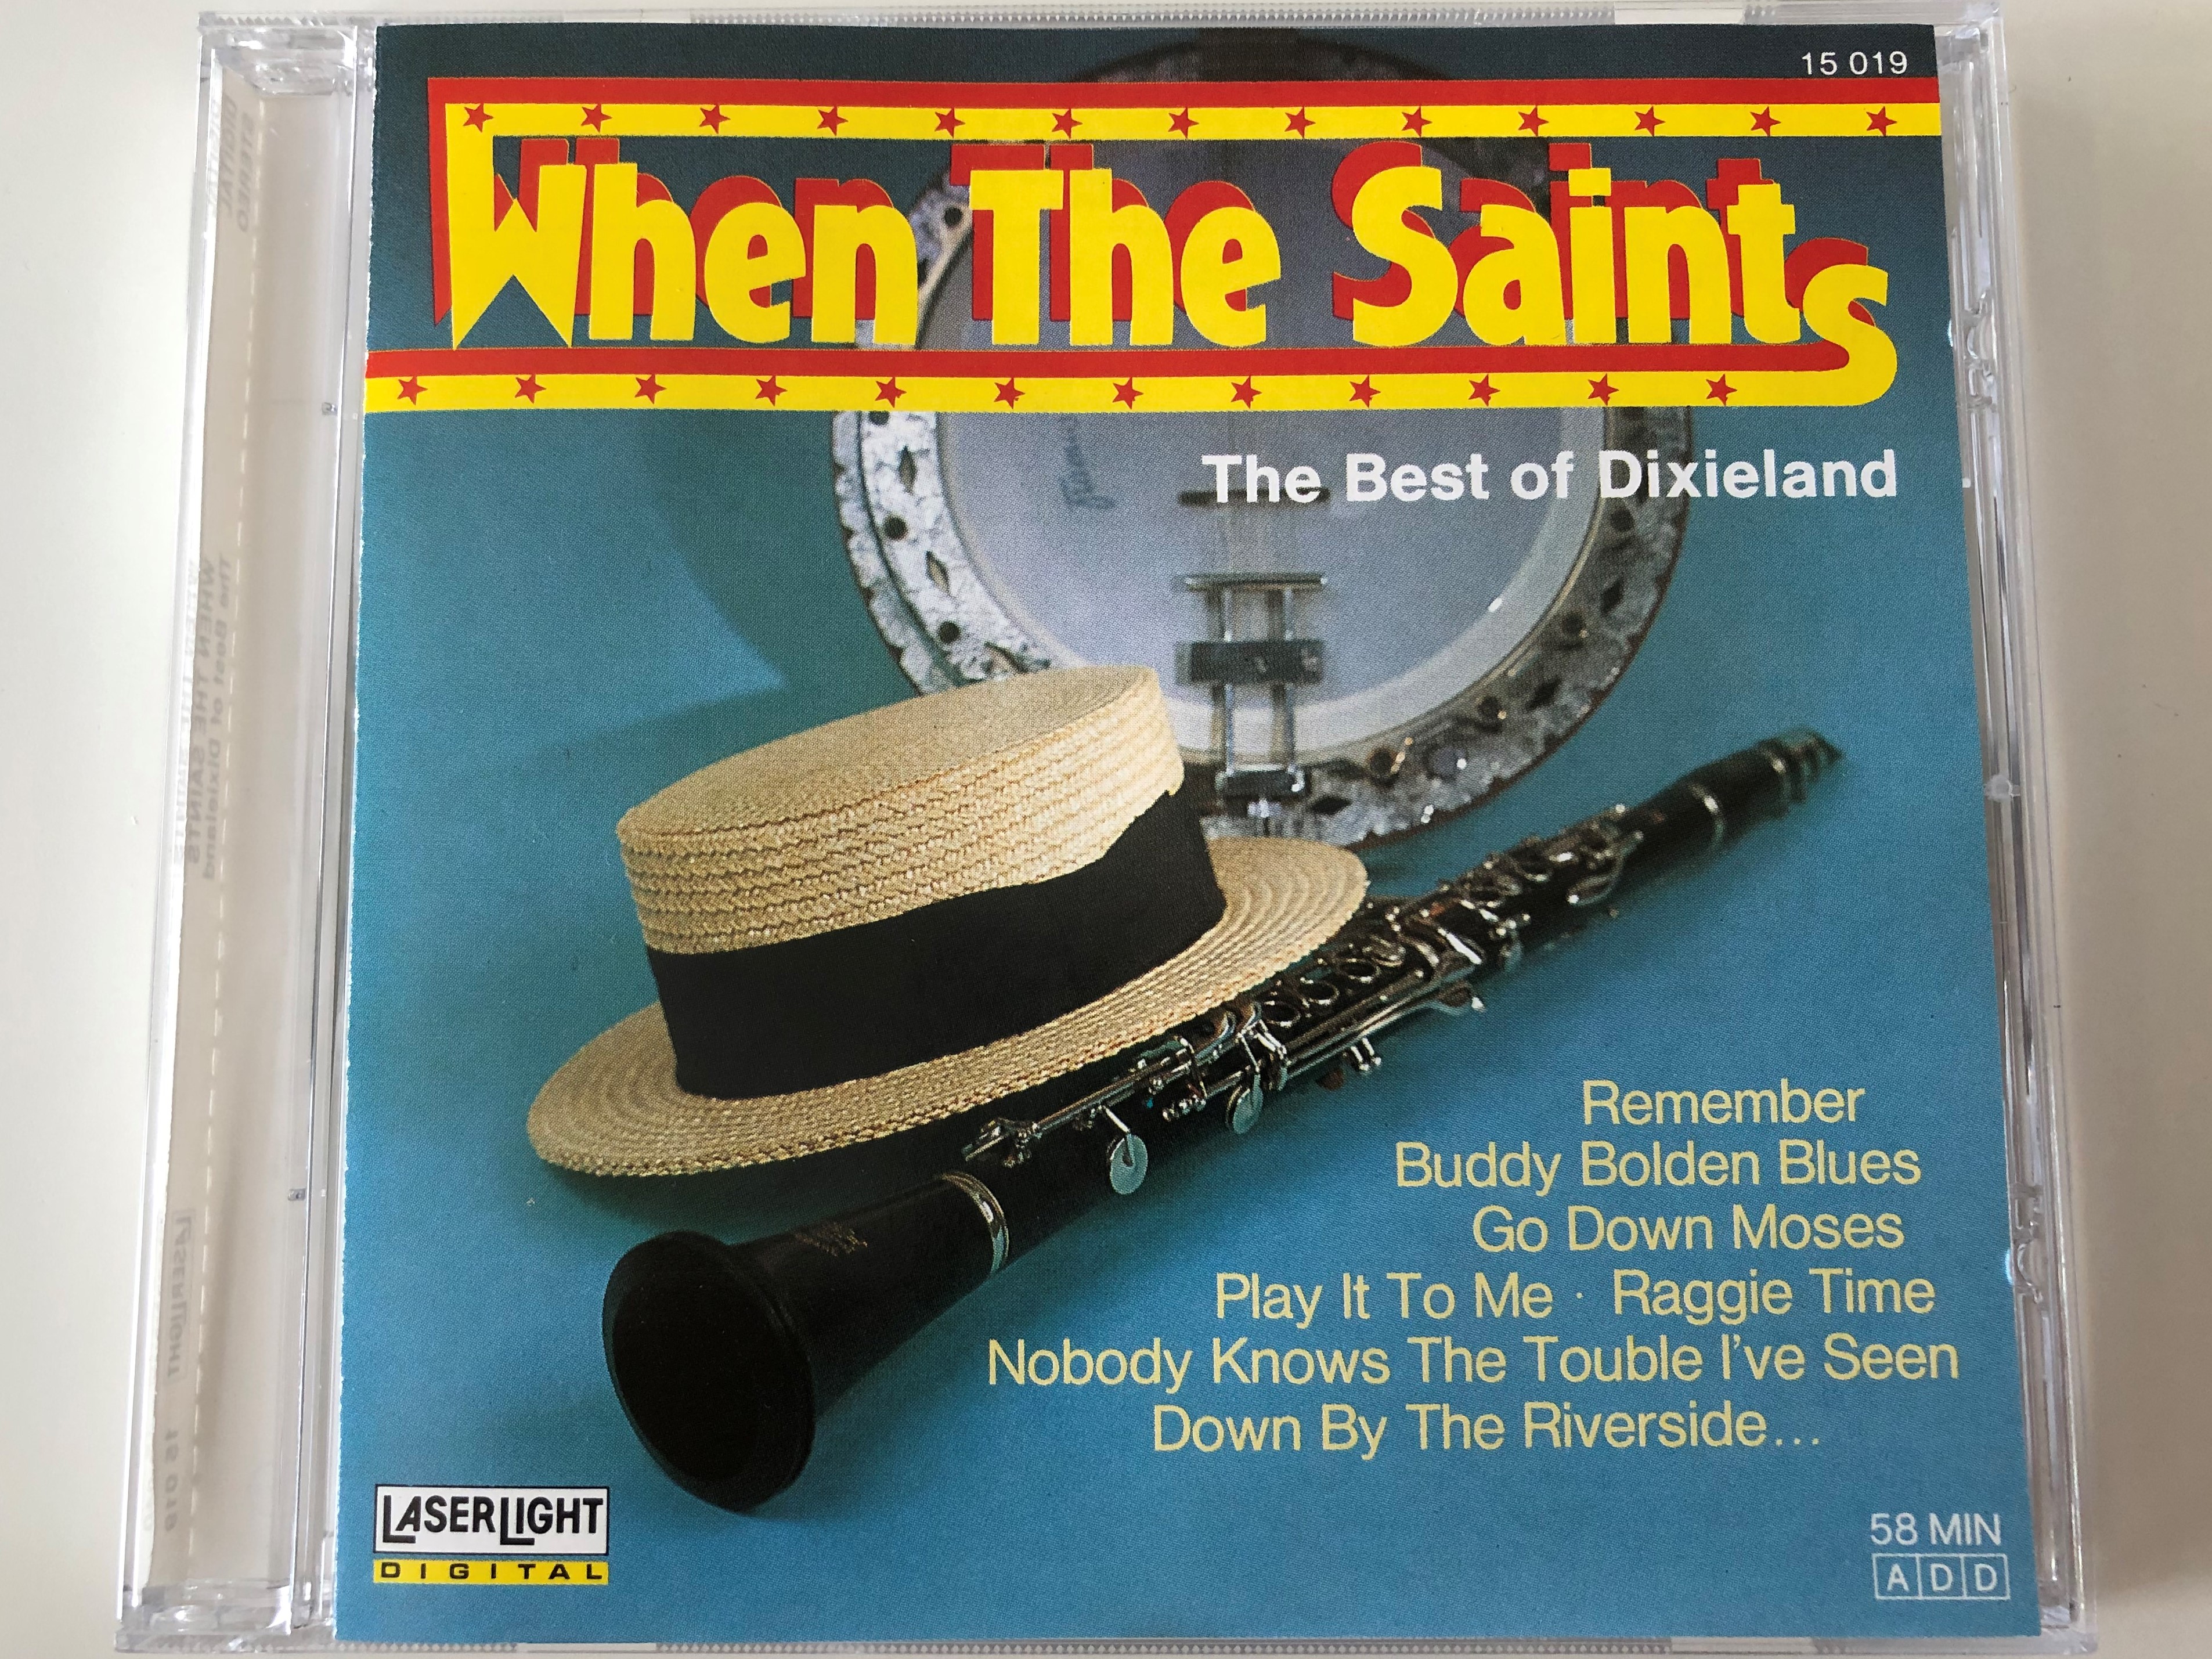 when-the-saints-the-best-of-dixieland-remember-buddy-bolden-blues-go-down-moses-play-it-to-me-raggie-time-nobody-knows-the-trouble-i-ve-seen-down-by-the-riversie...-laserlight-digital-1-.jpg